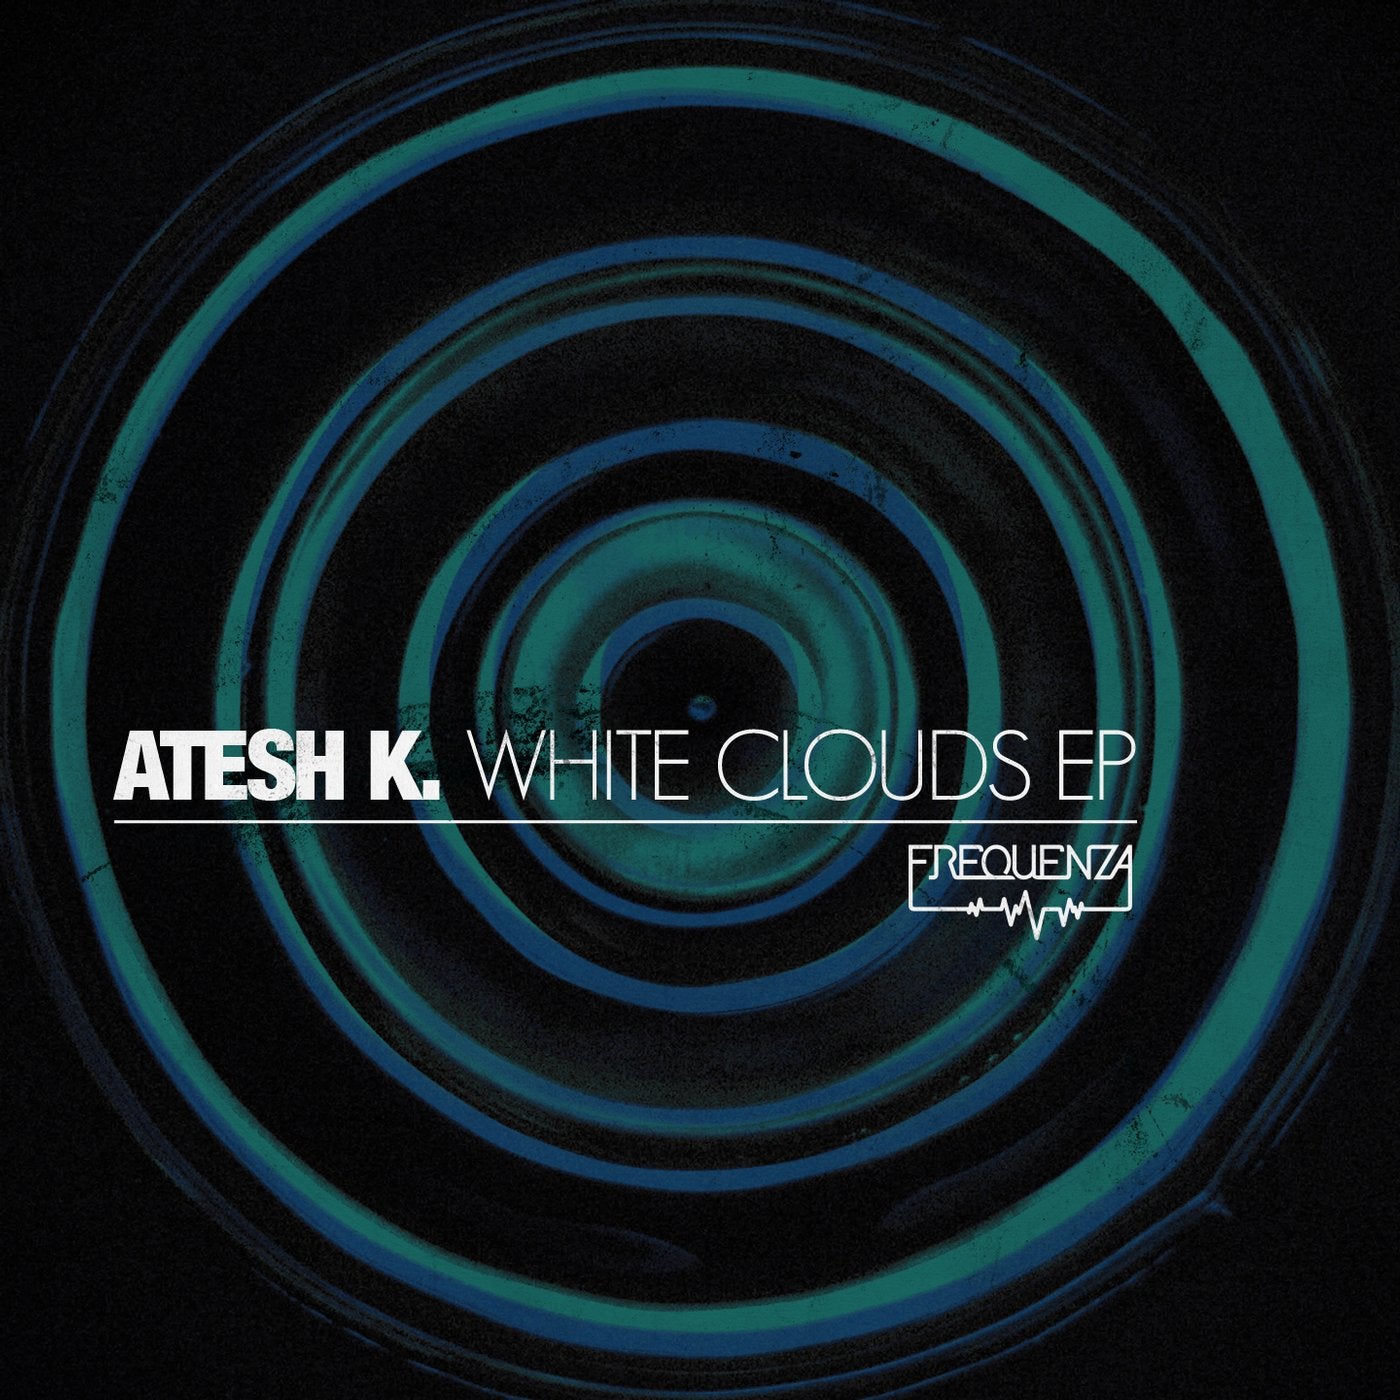 White Clouds EP